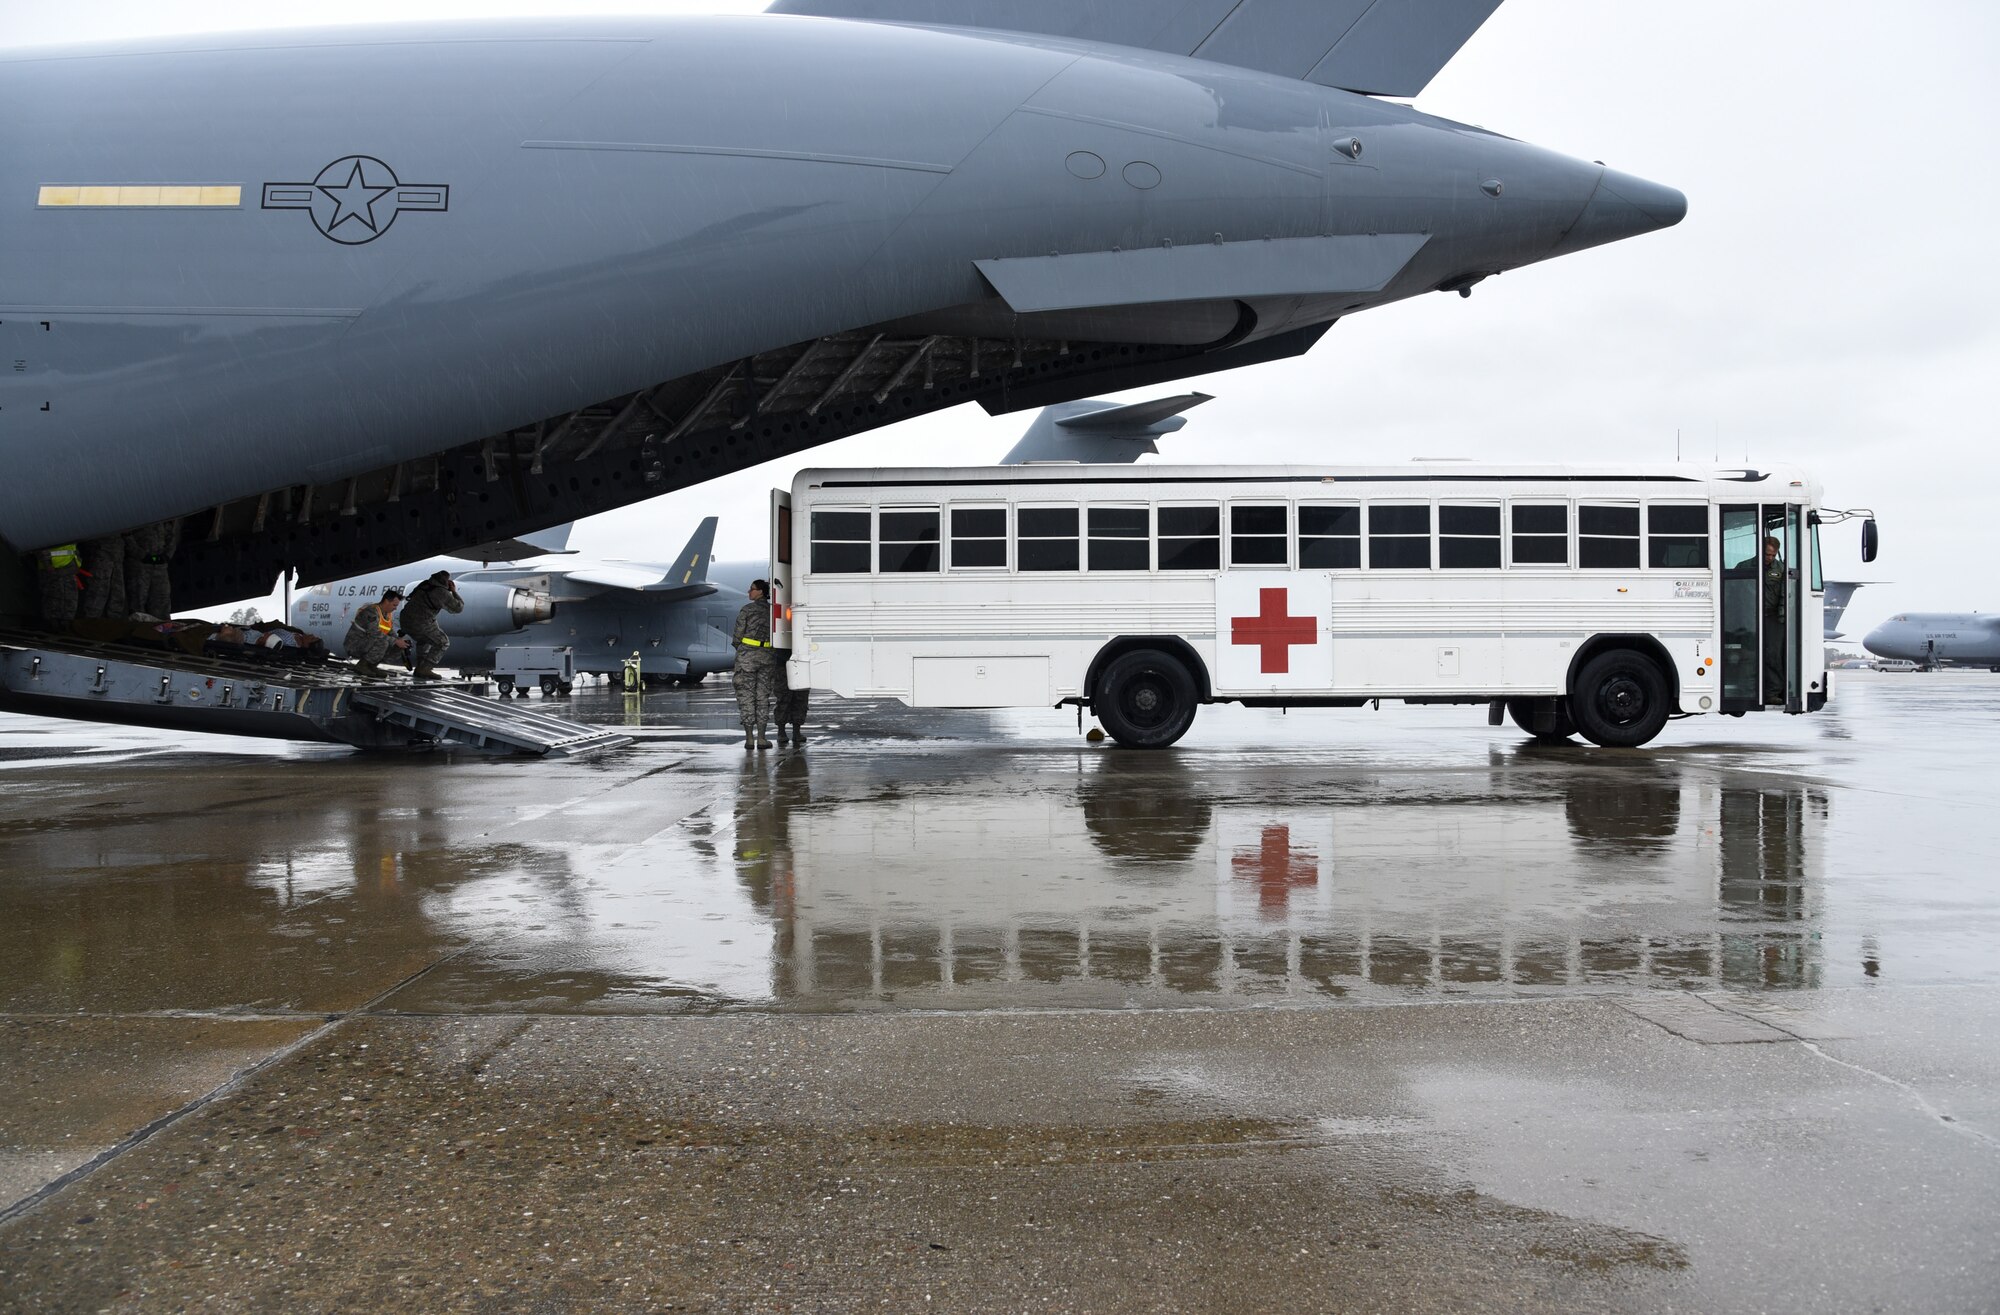 An ambulatory bus reverses to a C-17 Globemaster III to transport patients at Travis Air Force Base, Calif., March 24, 2017. This scenario was part of Patriot Delta, an aeromedical evacuation training exercise. (U.S. Air Force photo by Senior Airman Sam Salopek)